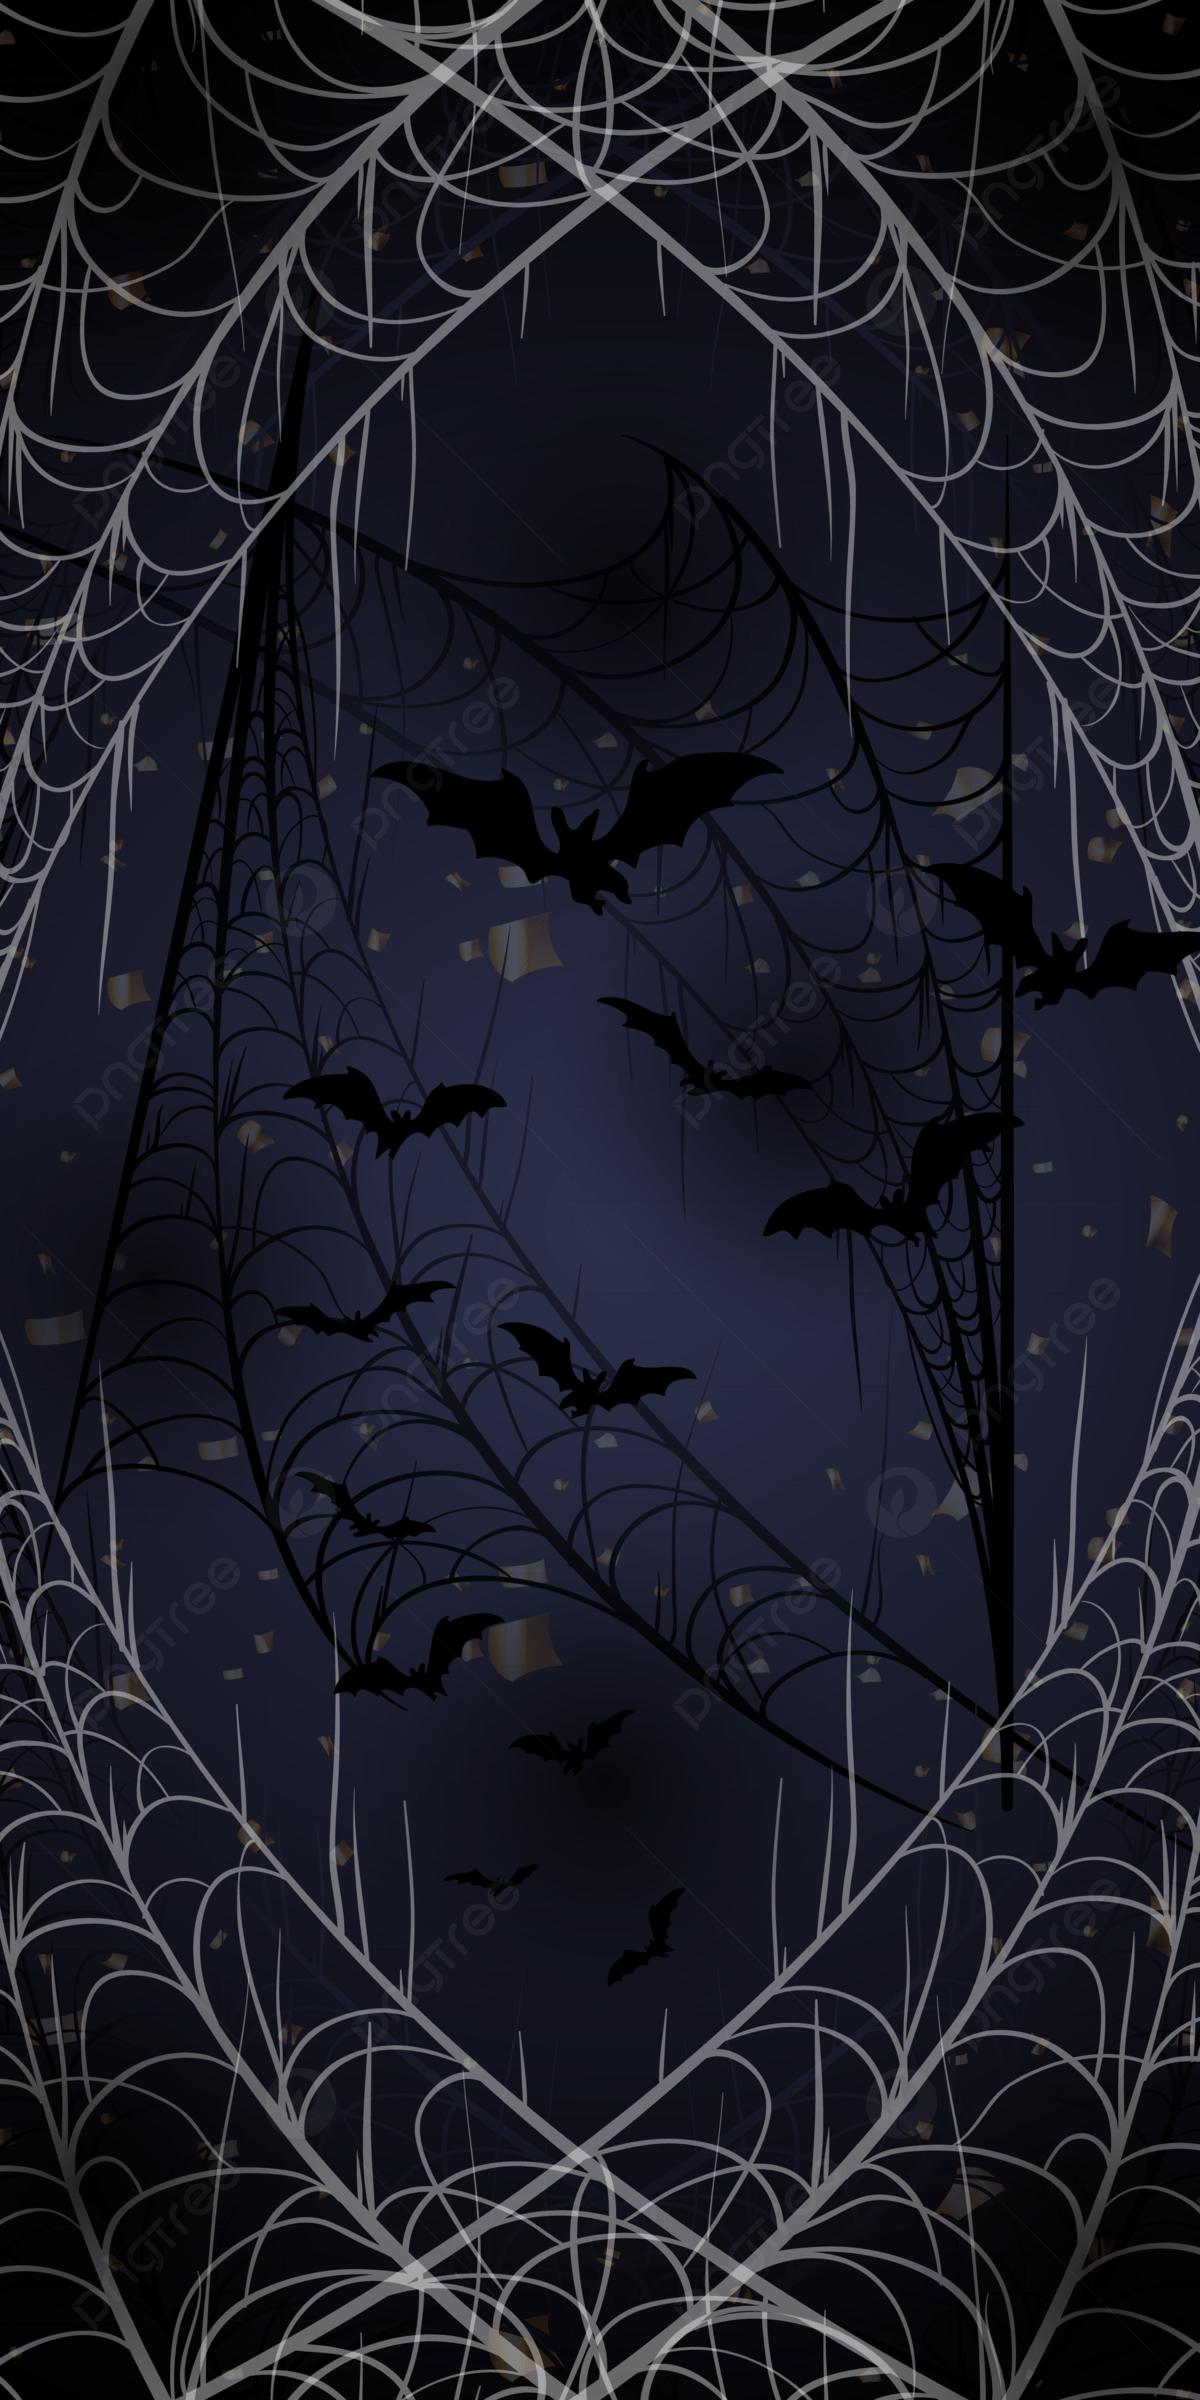 Witch Party Halloween Cobweb Black Background Wallpaper Image For Free Download